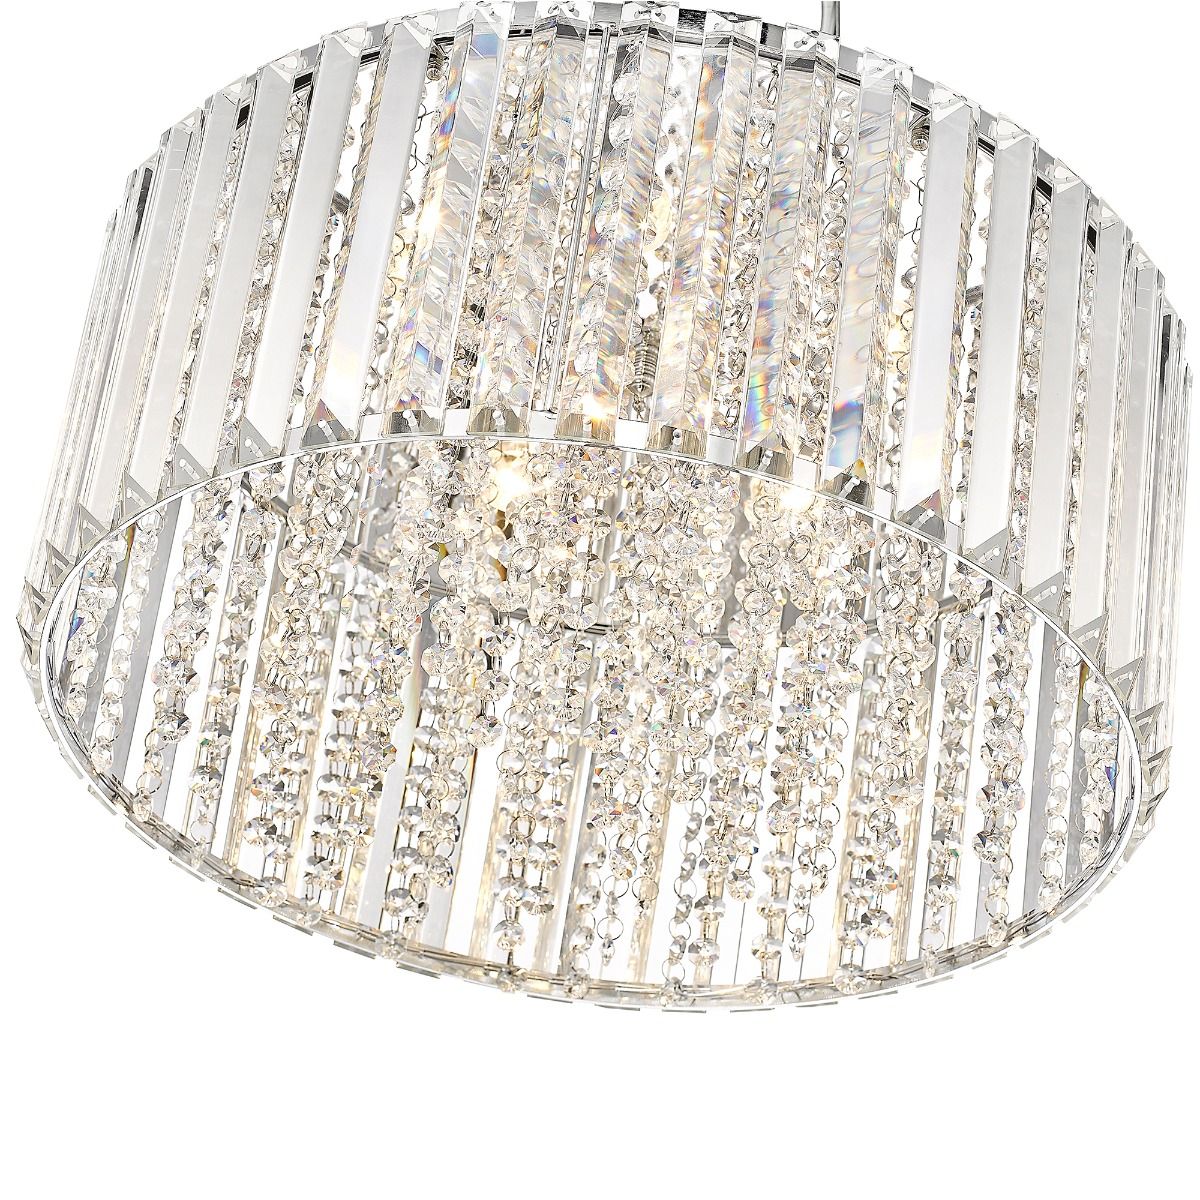 ove-chandelier-rond-patience-del-intégrée-led-integrated-round-5